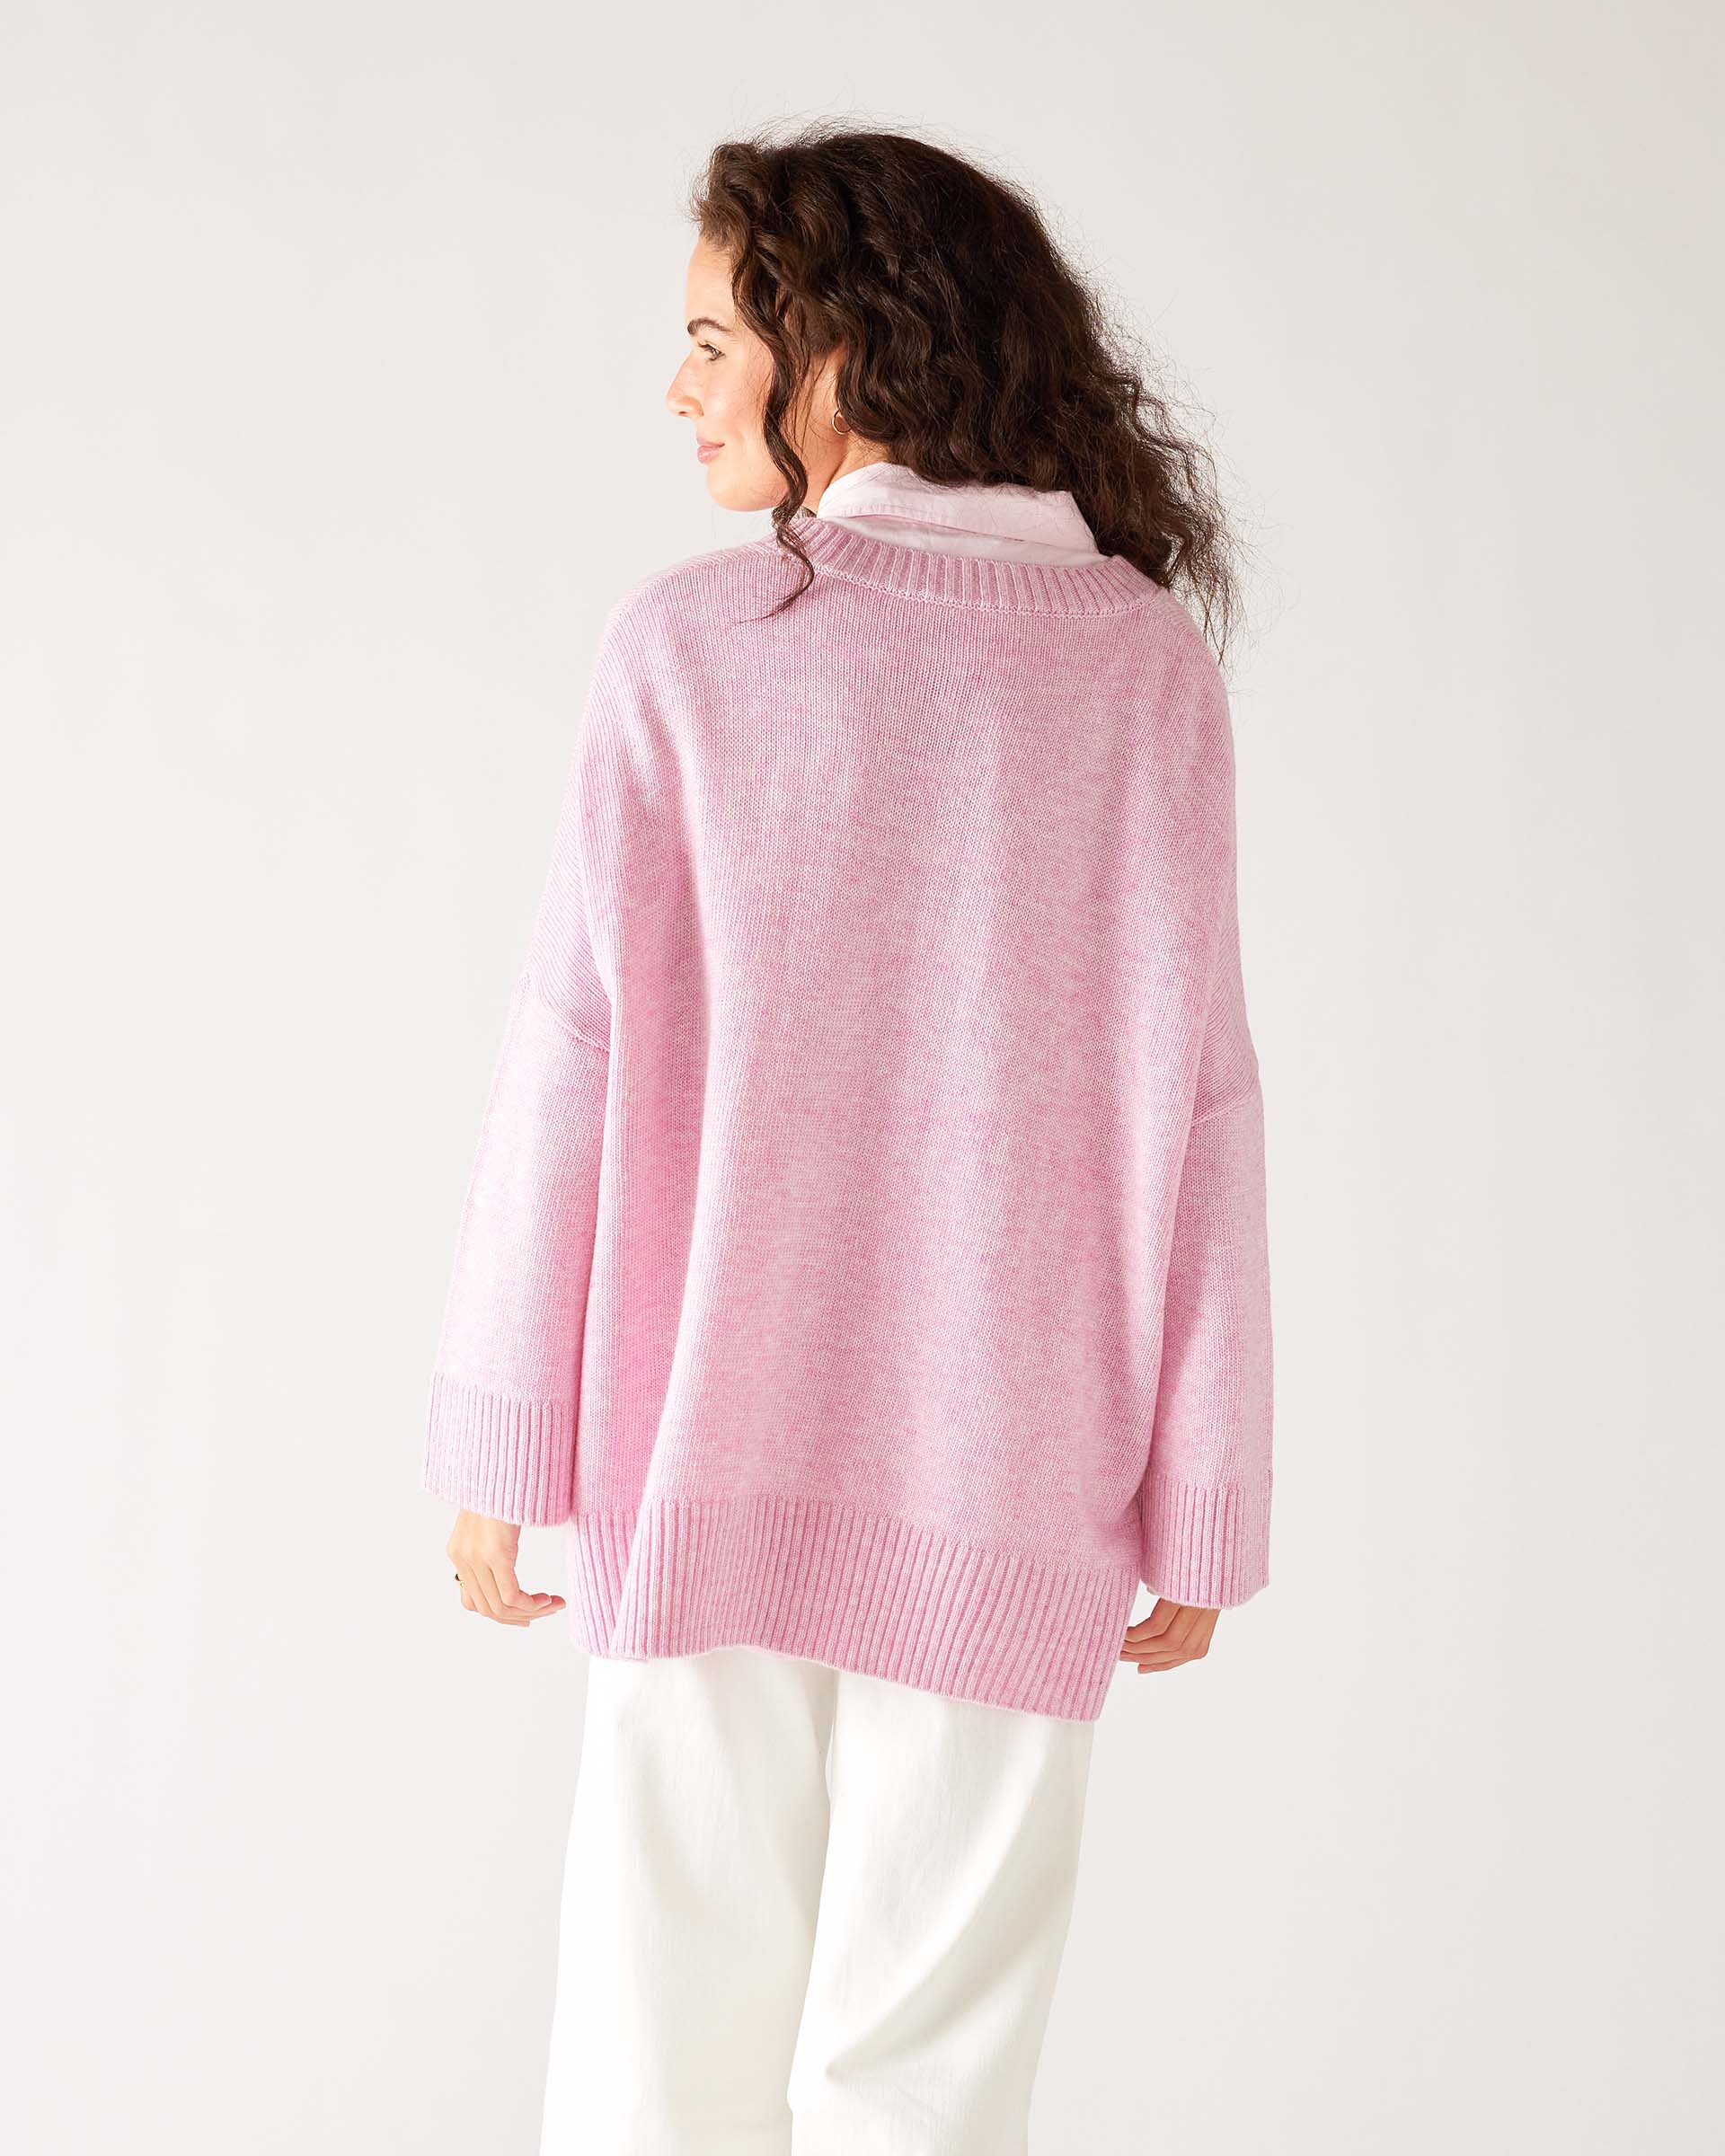 Women's Light Pink Midweight Loose Fitting V-neck Sweater Rear View 